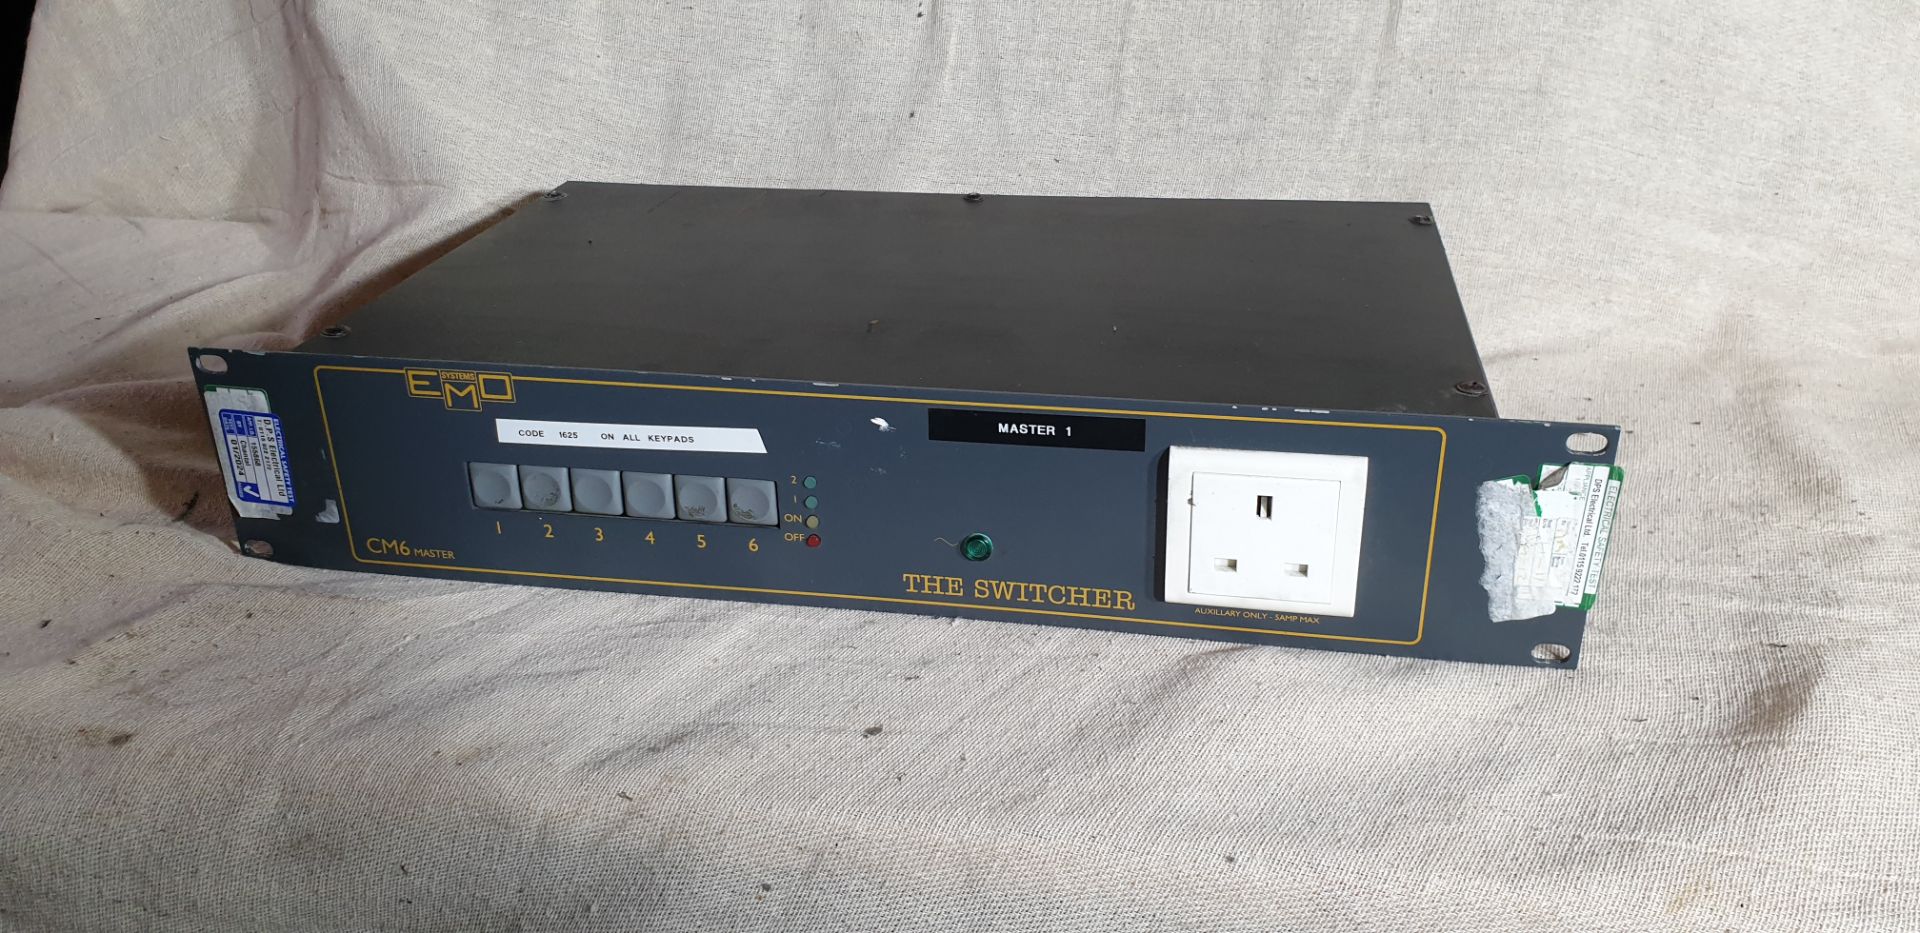 1 ; Emo Systems CM6 Master Switcher Unit